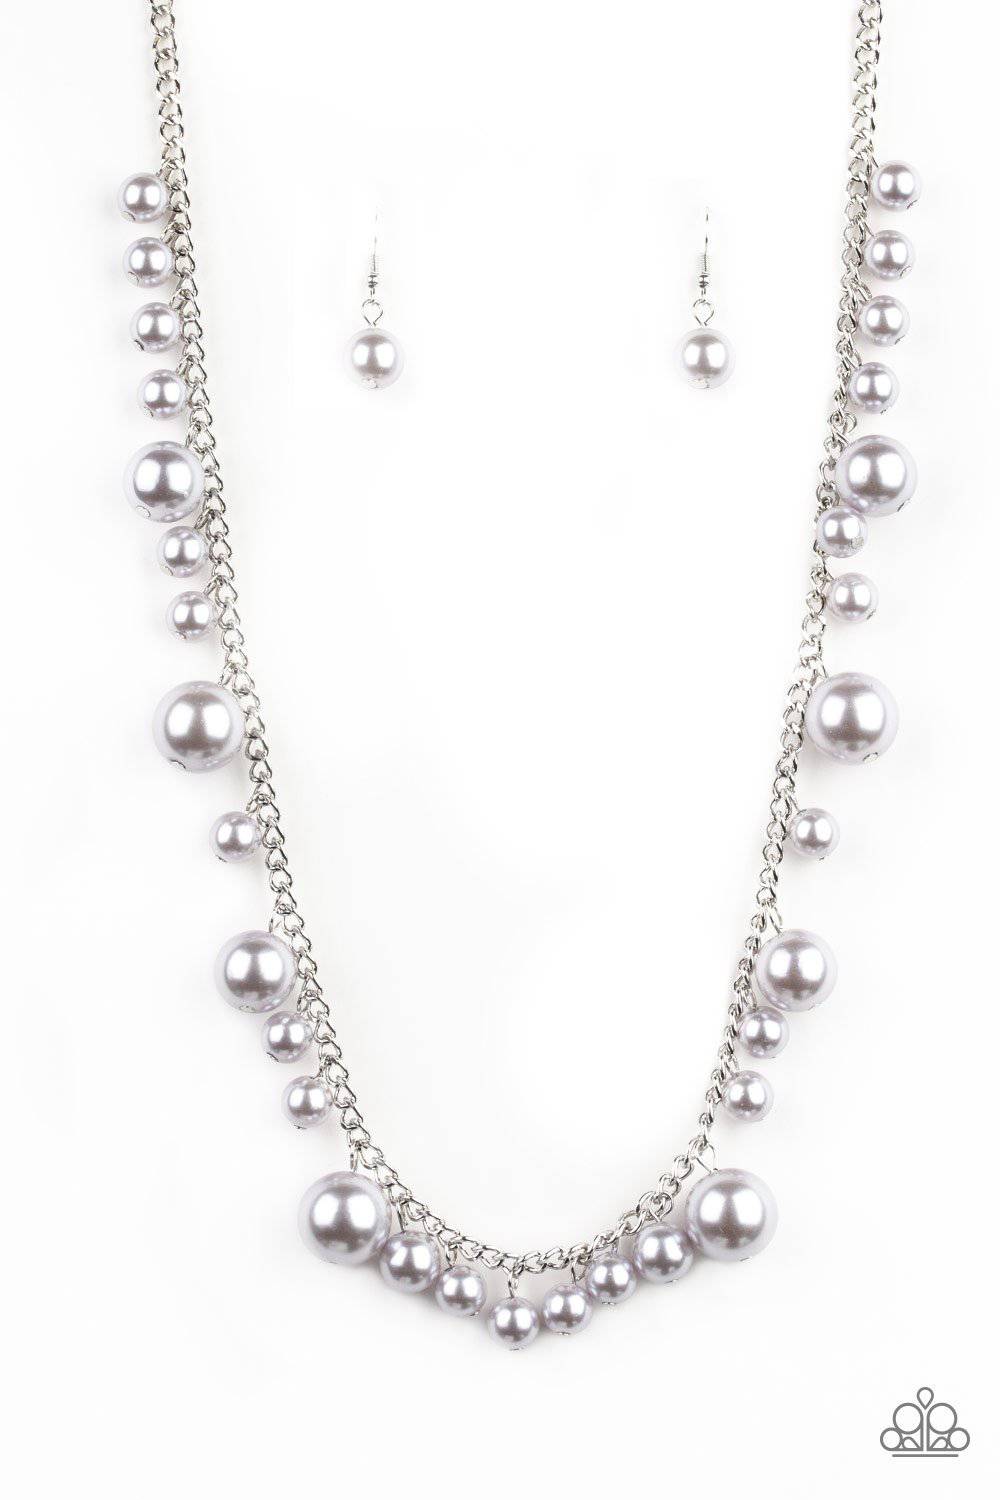 Theres Always Room At The Top - Silver-Paparazzi Accessories - GlaMarous Titi Jewels